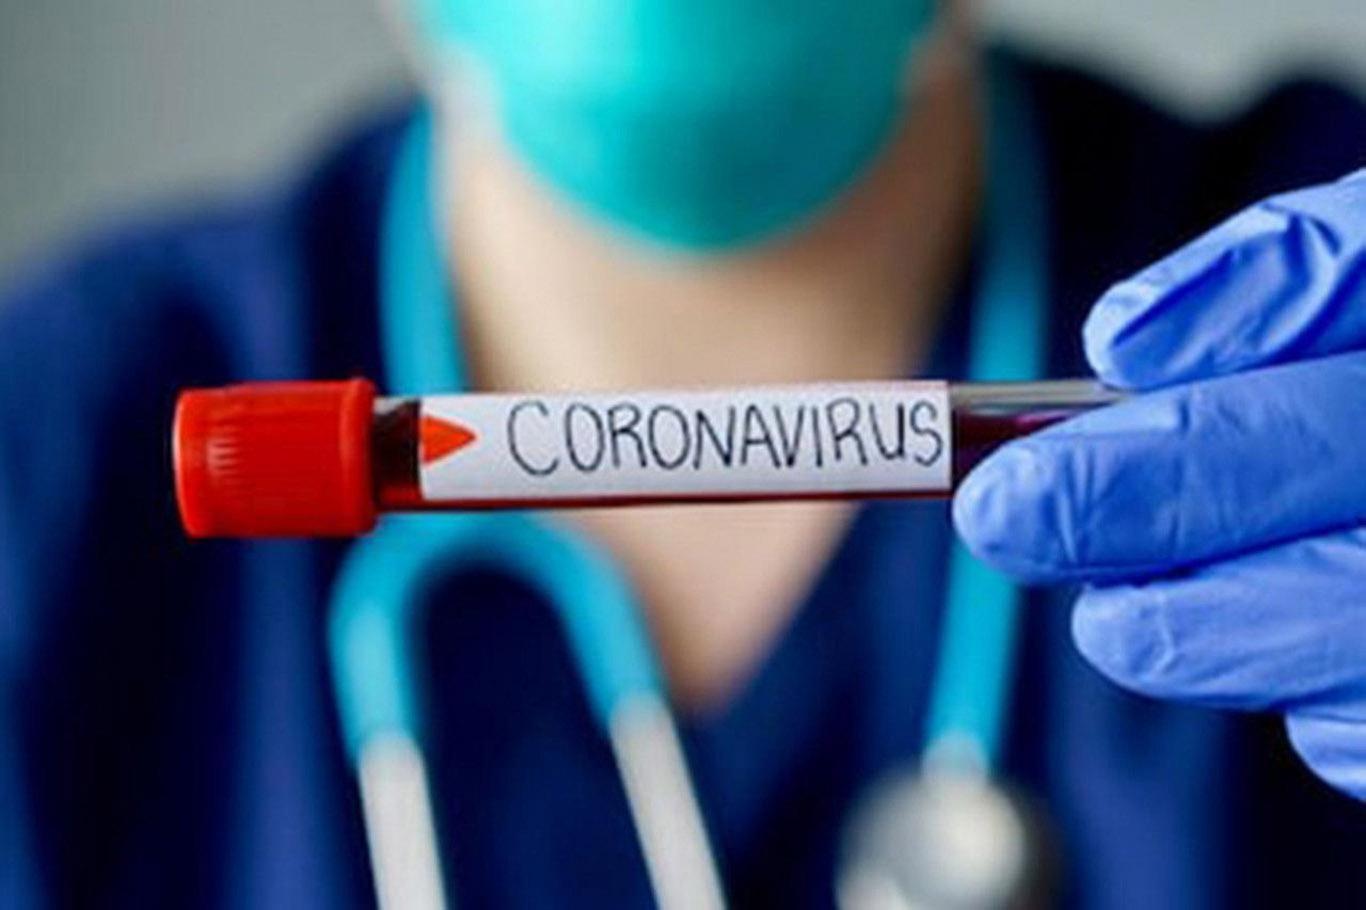 Death toll from coronavirus pandemic rises to 42 in Iraq